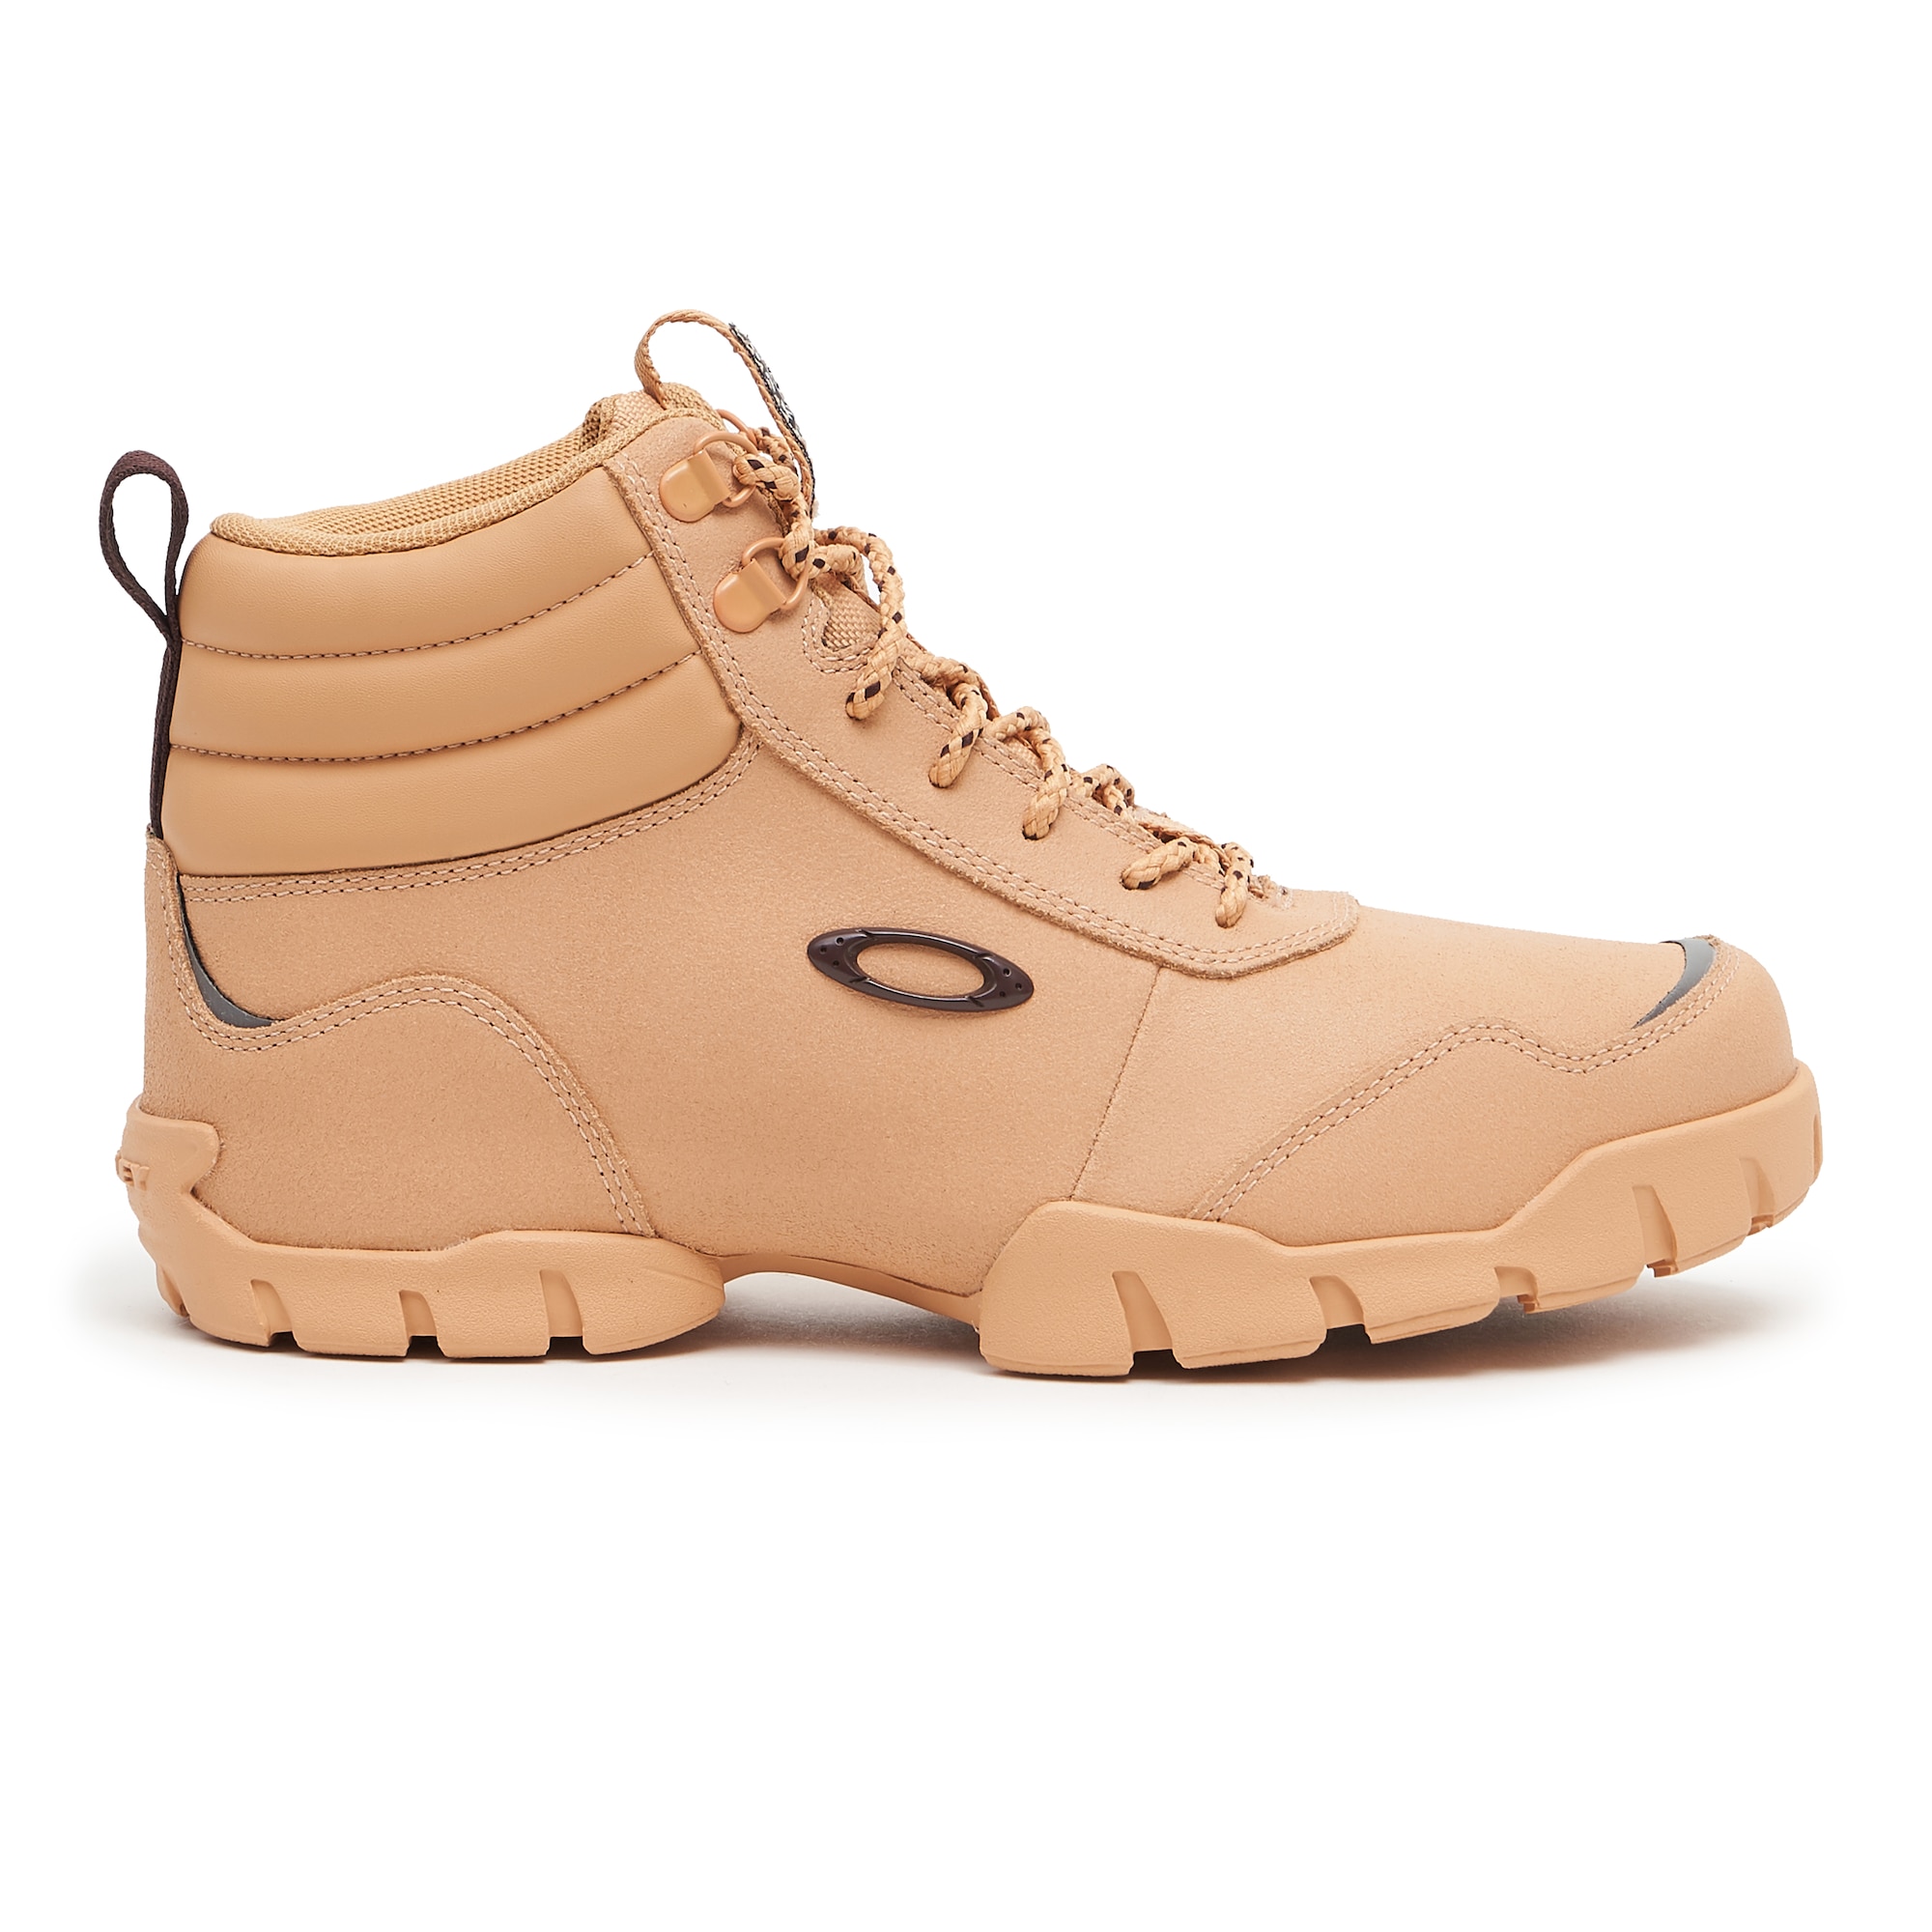 Oakley Outdoor Boots - New Clay - 12216-43B | Oakley OSI Store ...